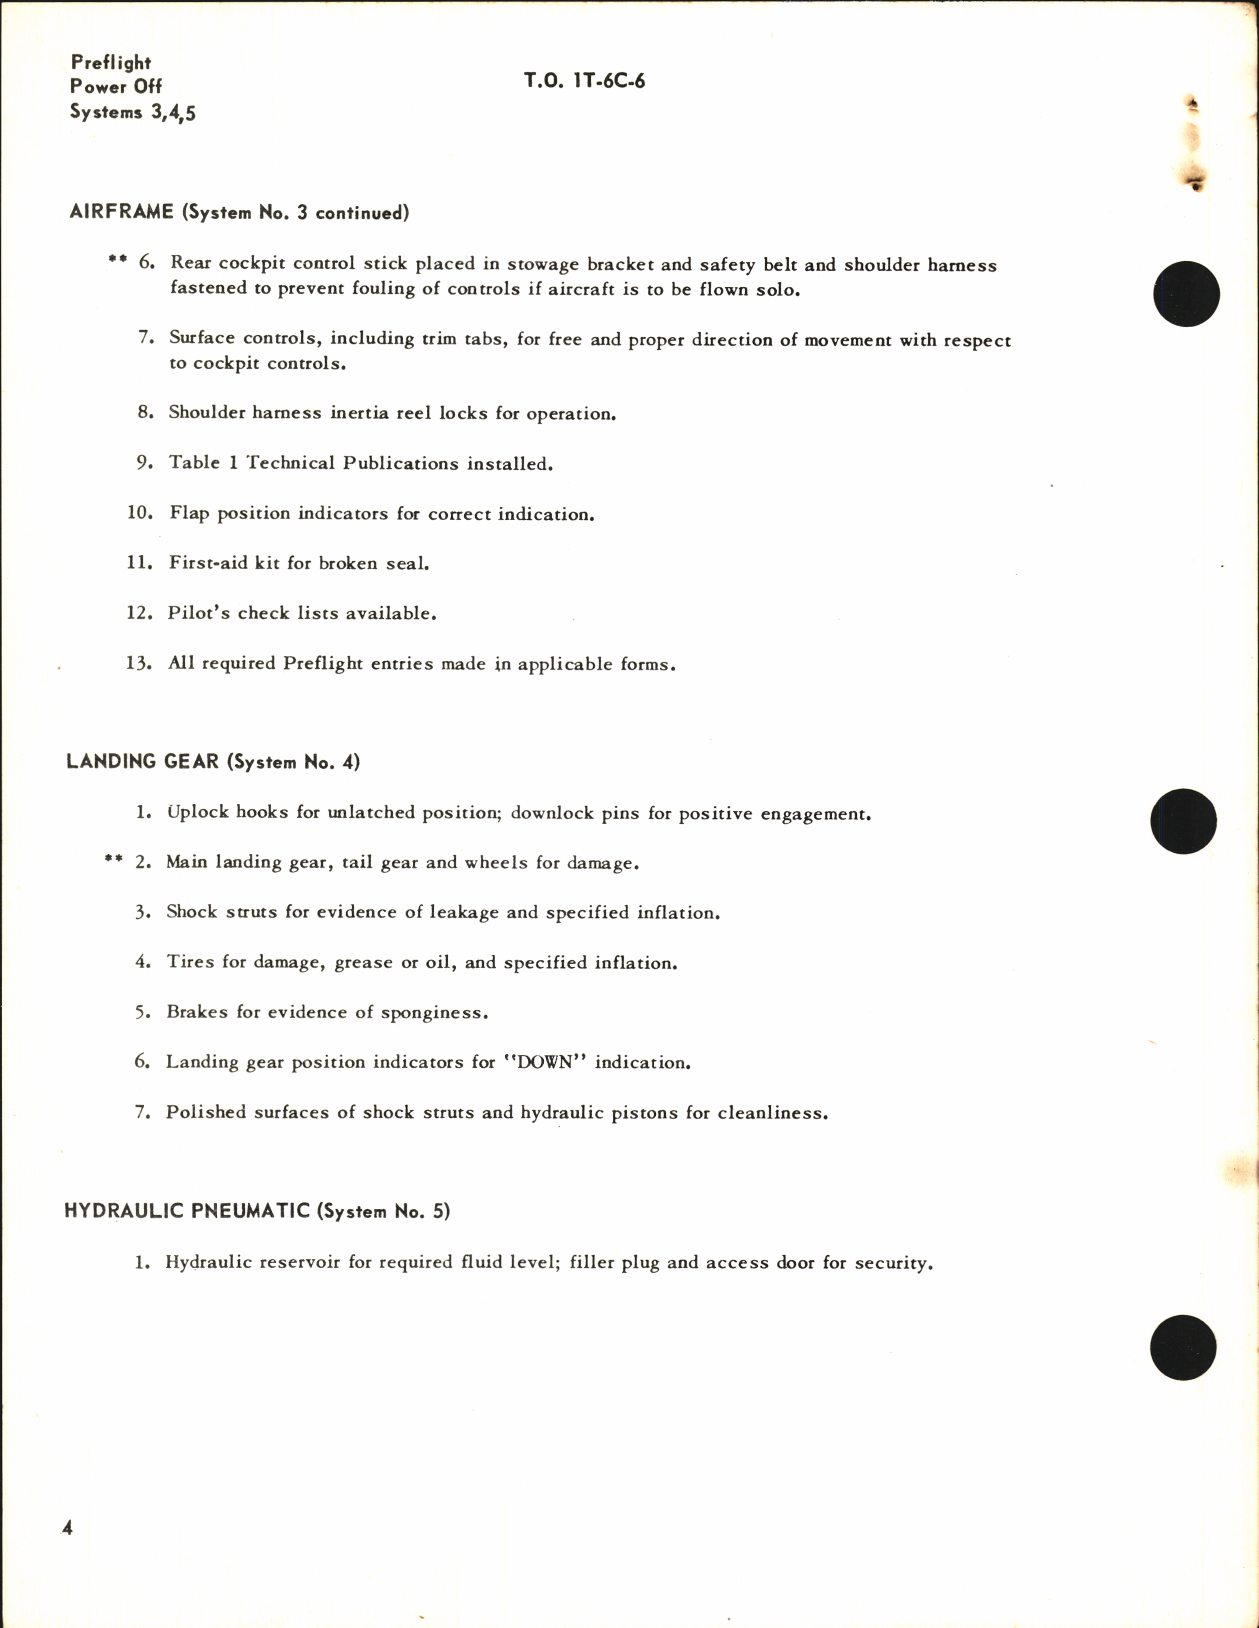 Sample page 6 from AirCorps Library document: Inspection Requirements for T-6 Aircraft